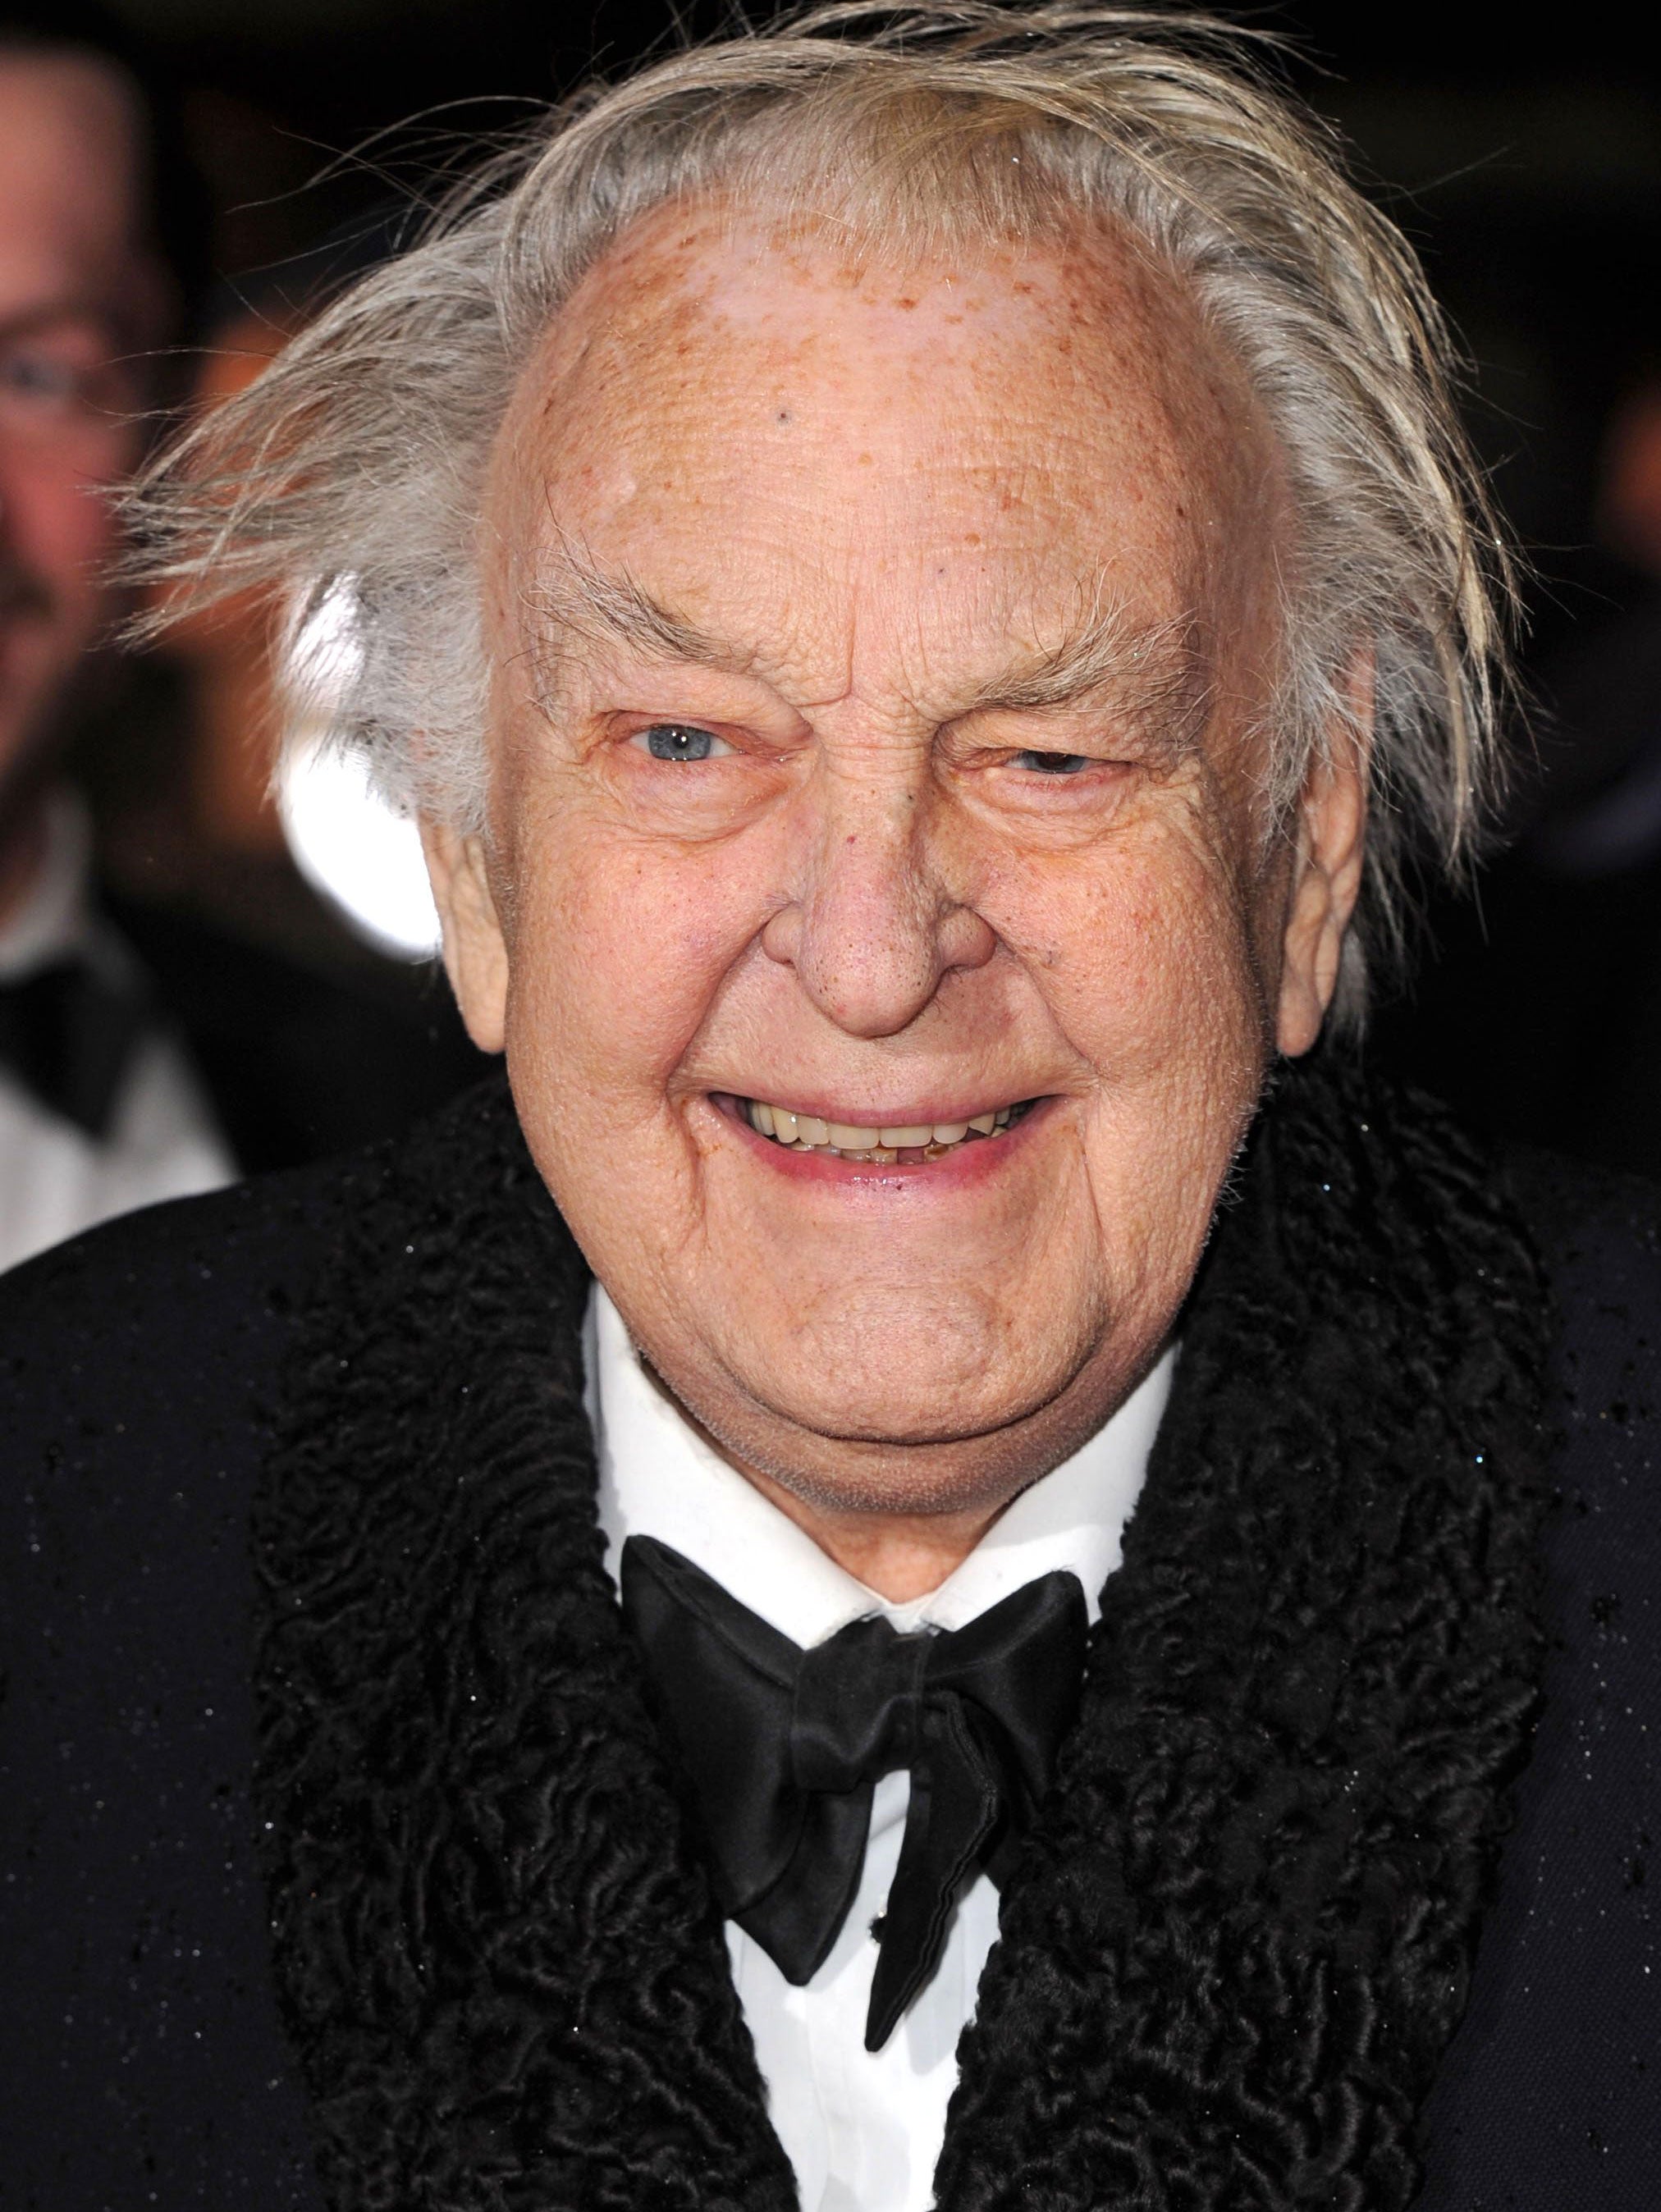 Sir Donald Sinden has died at his home, aged 90